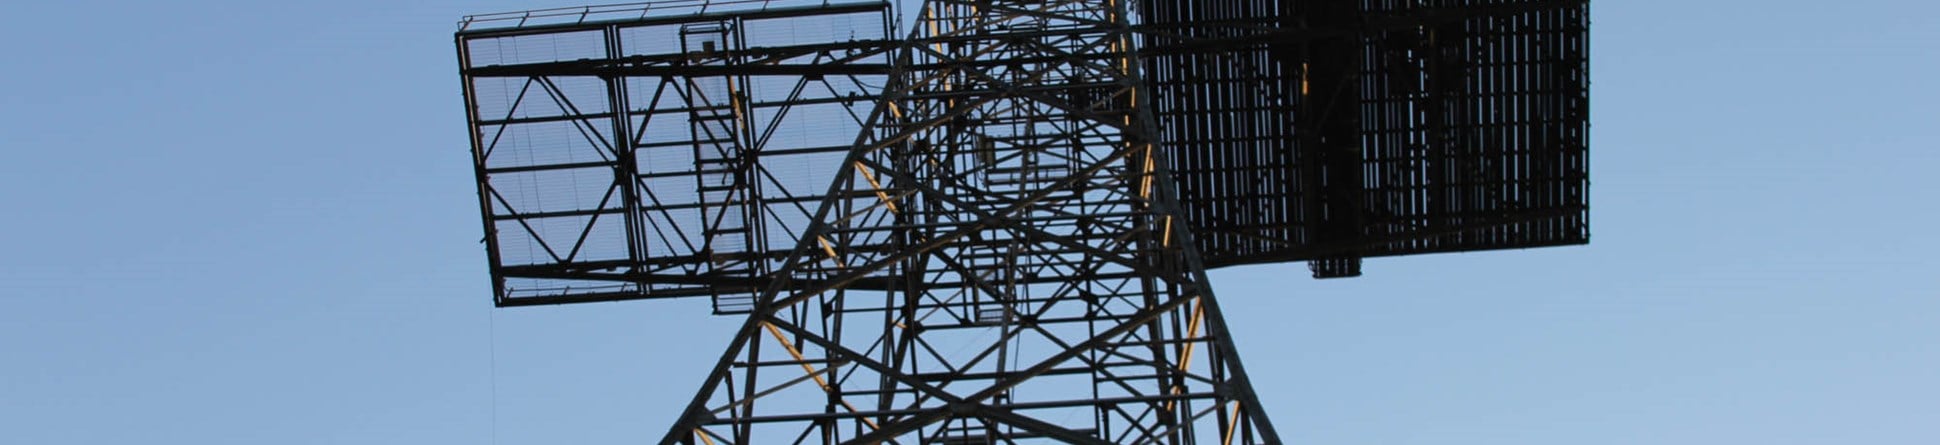 The metal structure of the Chain Home Tower rising into the blue sky